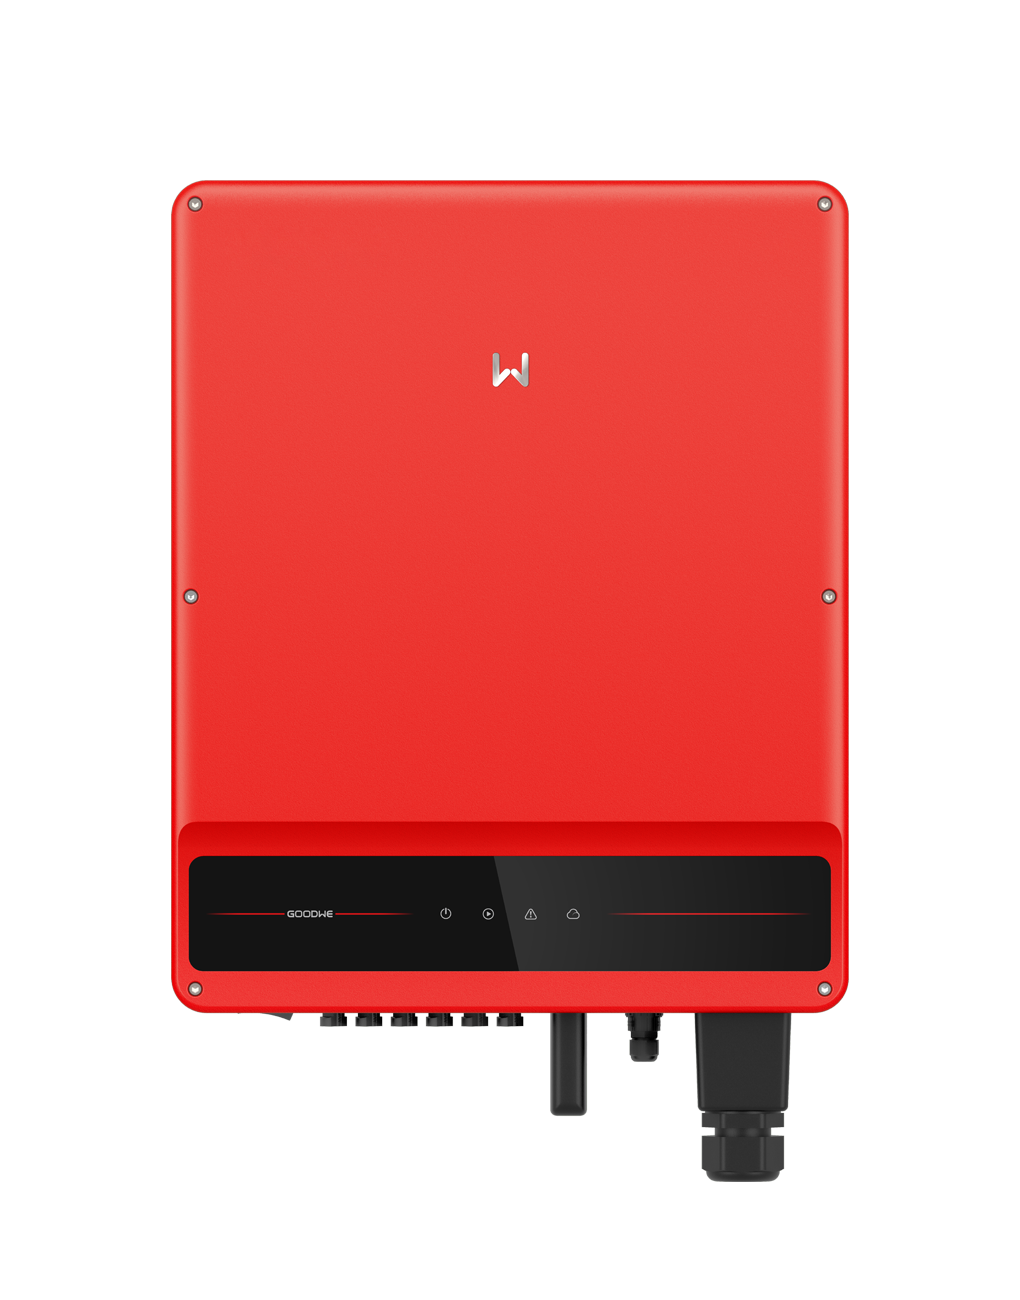 fw.svg Residential Inverters XS Series 0.7-3 kW | Single phase | 1 MPPT 11-1.png MORE DNS Series 3-6 kW | Single phase | 2 MPPTs 12-1.png MORE SDT G2 Series 4-15 kW | Three phase | 2 MPPTs 13-1.png MORE MS Series 5-10 kW | Single phase | 3 MPPTs 15-1.png MORE SDT G2 PLUS+ Series 4-20 kW | Three Phase | 2 MPPTs SDTG2PLUS+8-20kw-1.png MORE wuding.svg Commercial Rooftop Inverters LVSMT Series